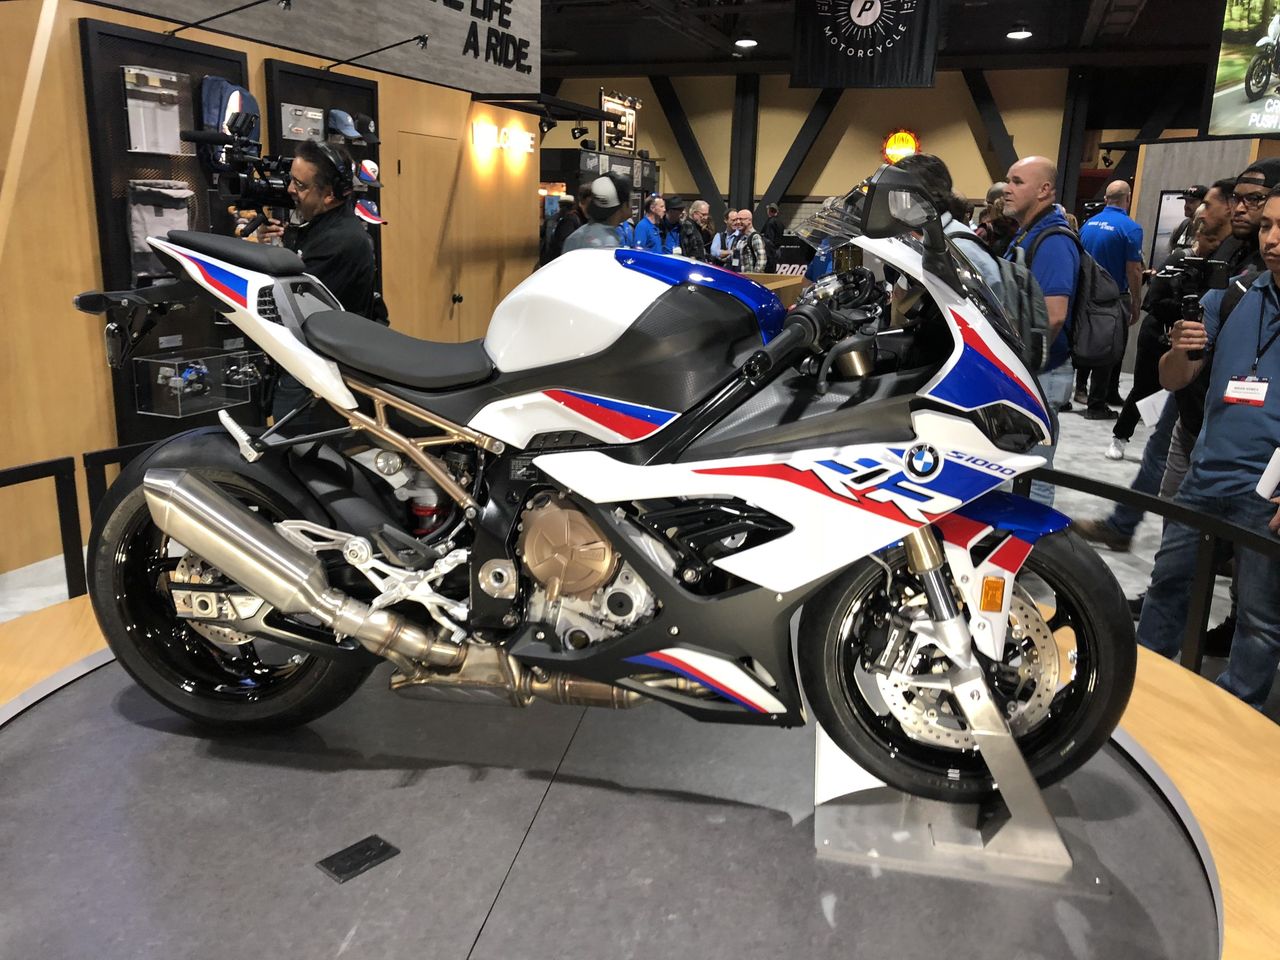 For 2019 BMW thoroughly overhauled its flagship superbike